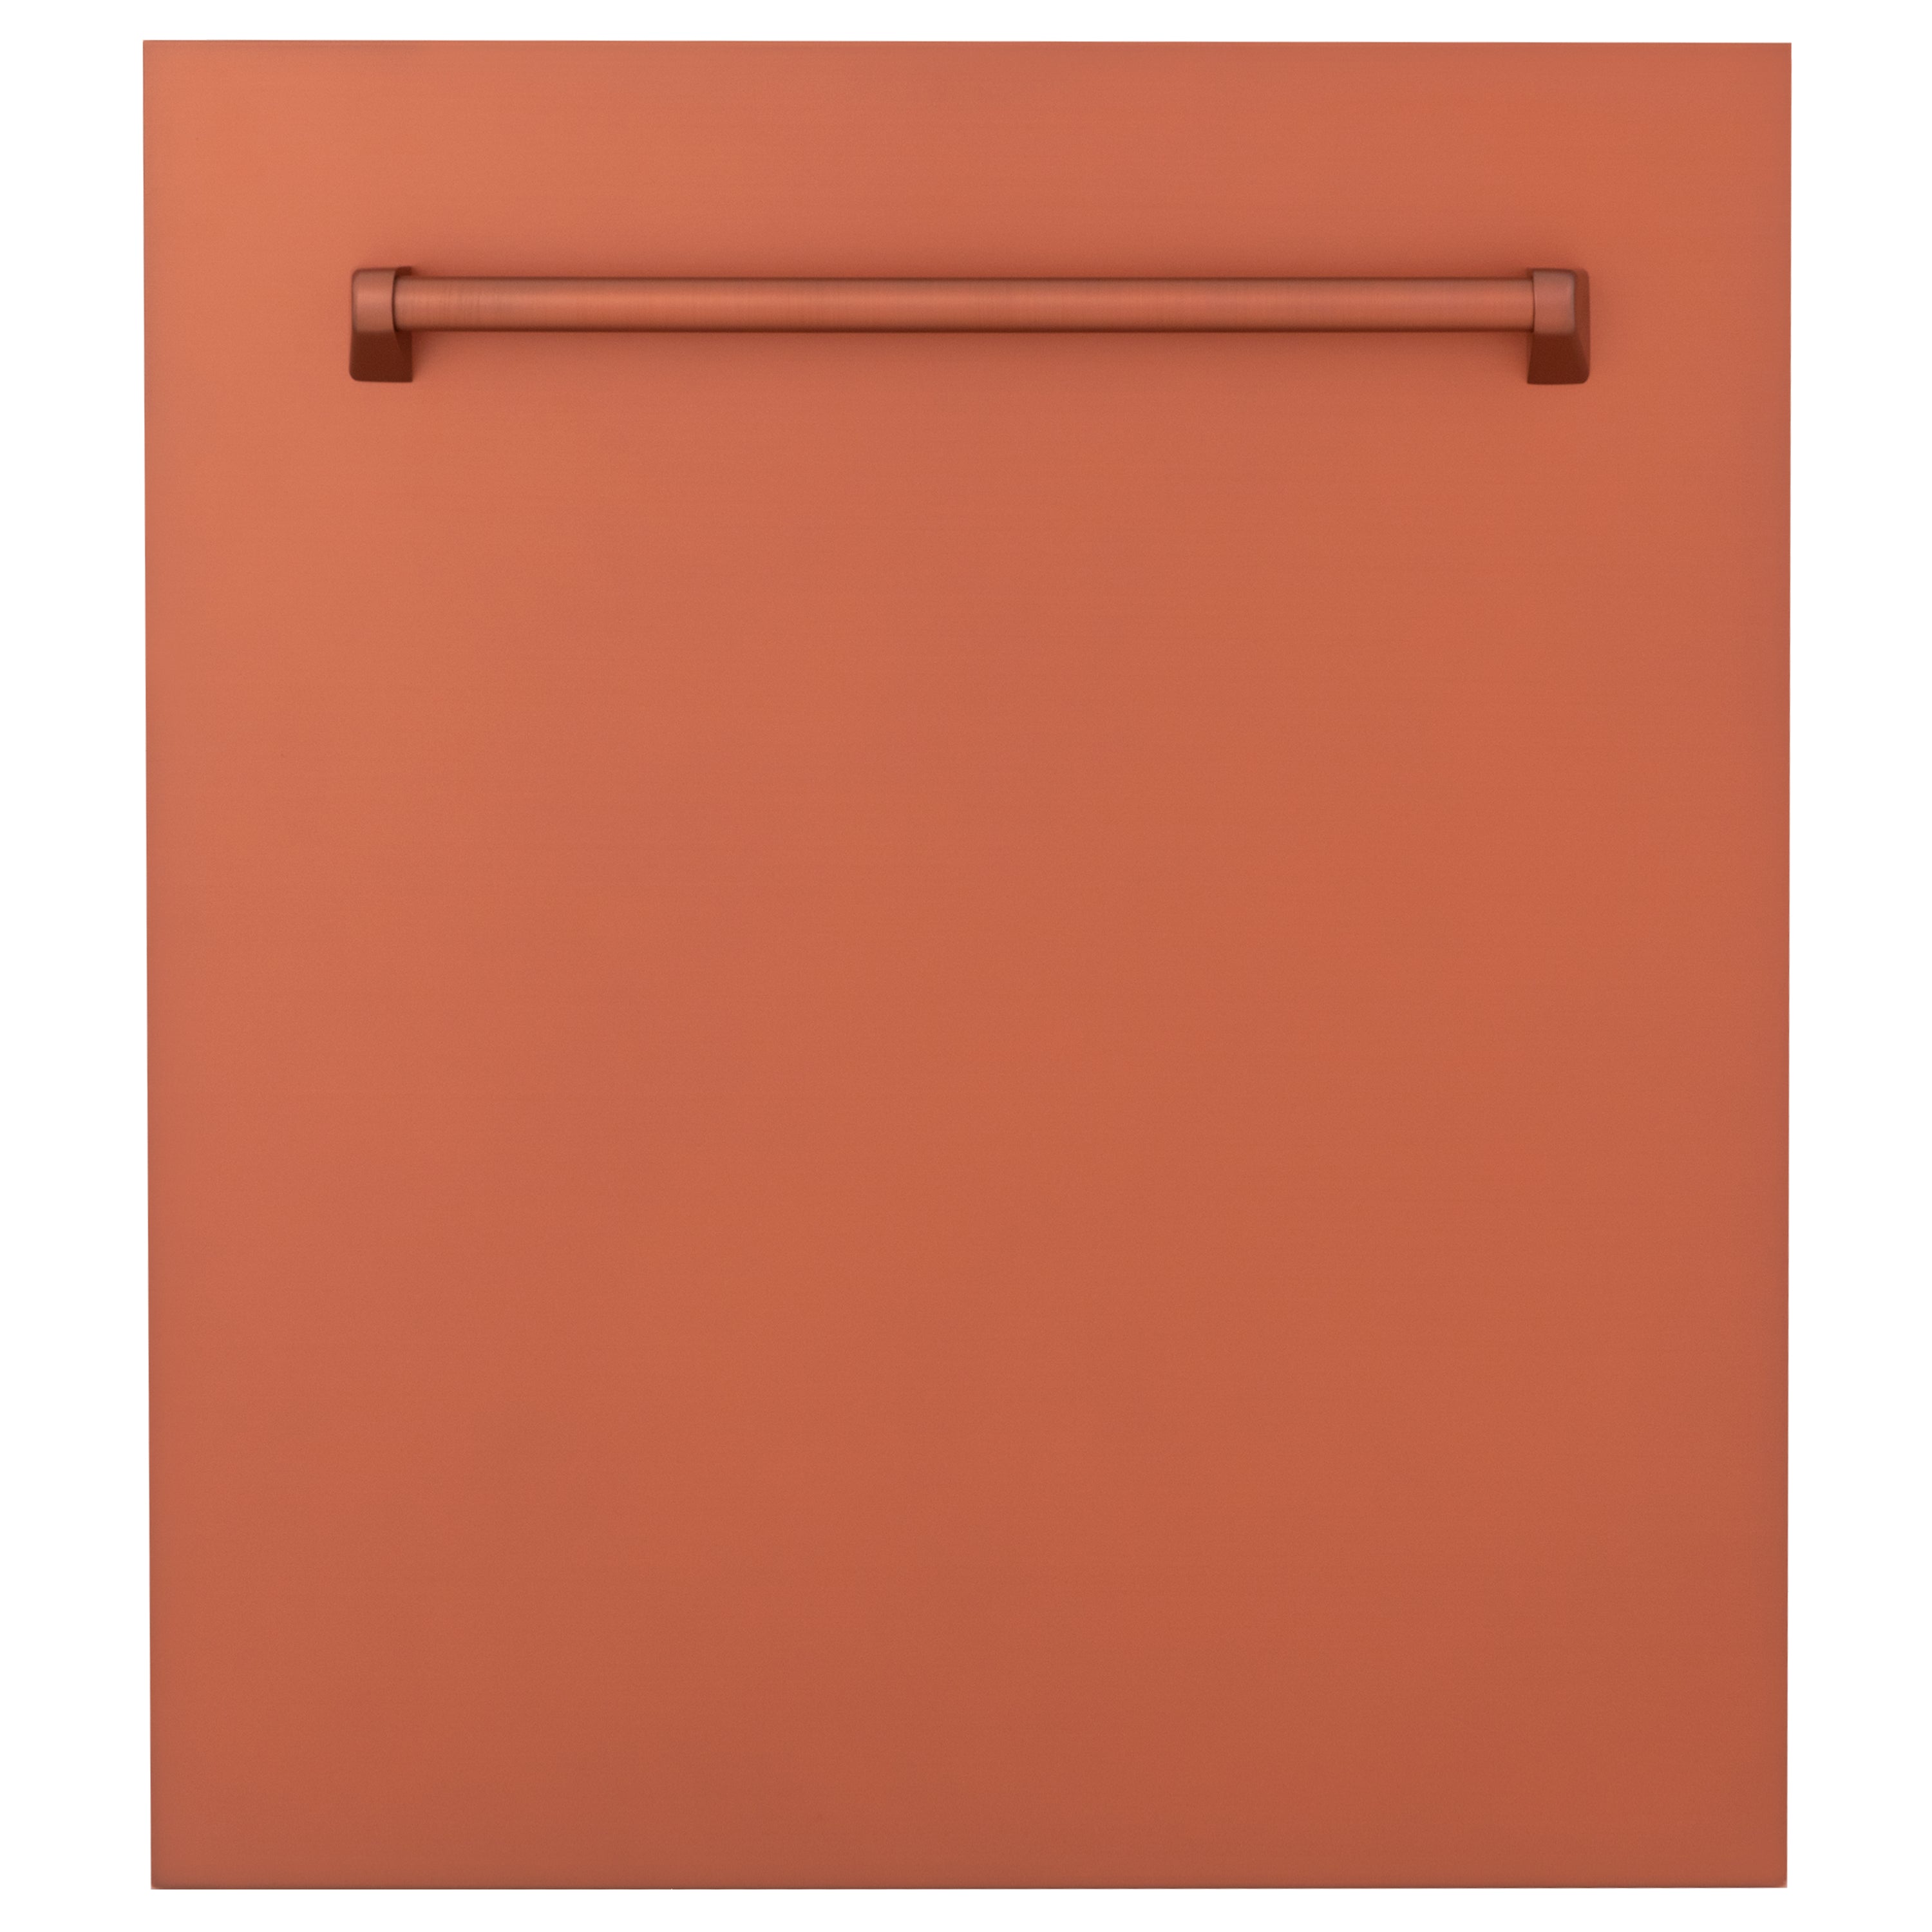 ZLINE 24" Tallac Series 3rd Rack Tall Tub Dishwasher in Copper with Stainless Steel Tub, 51dBa (DWV-C-24)